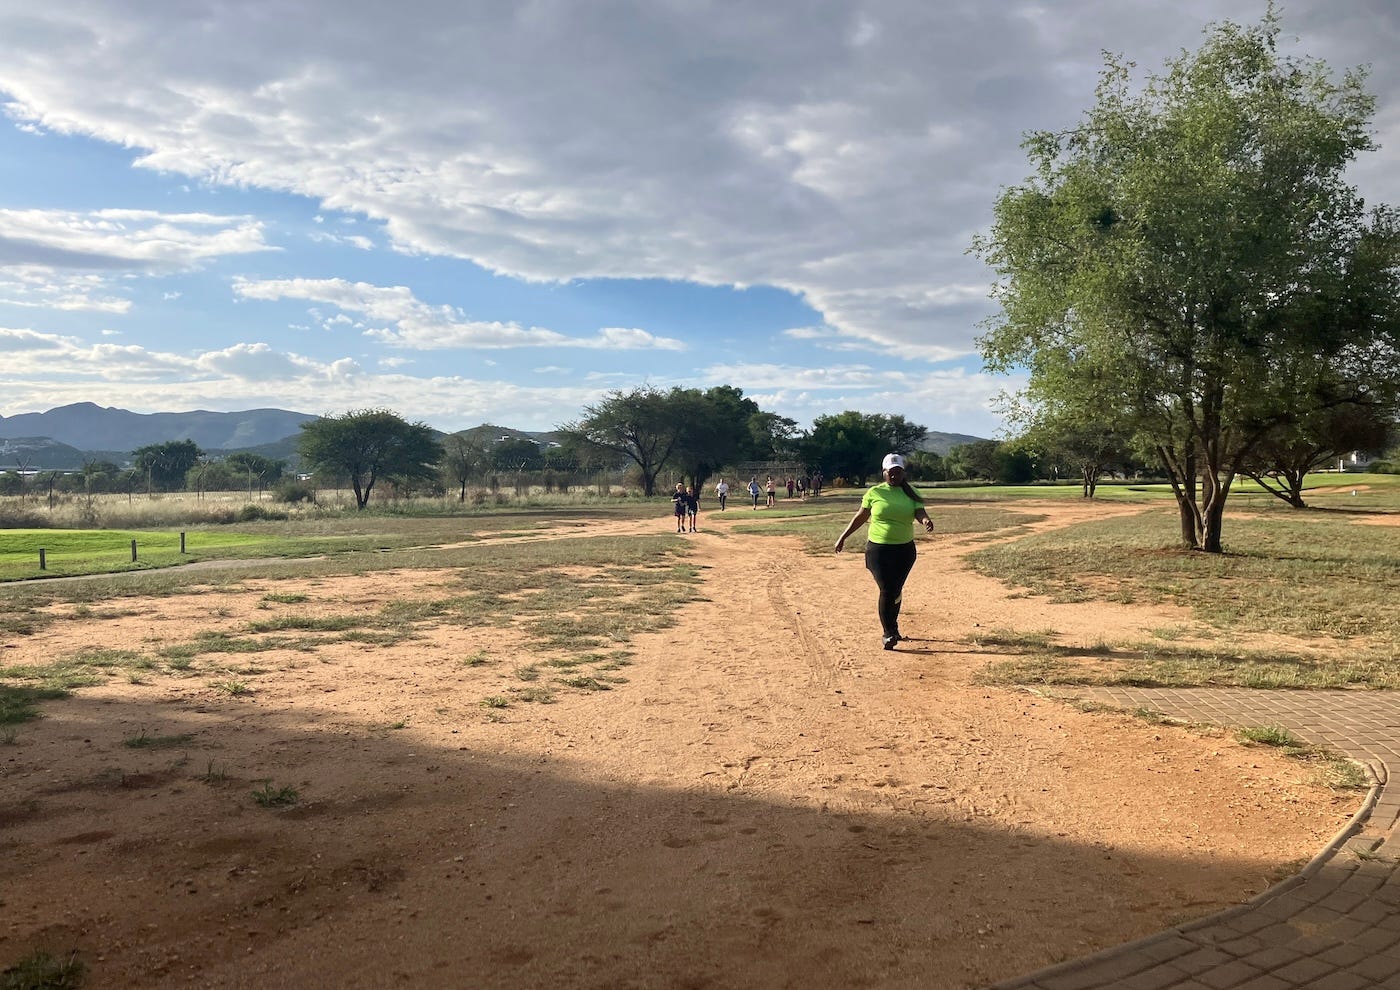 A wide sandy area with tufts of grass and a few people approaching, on the first half of their parkrun